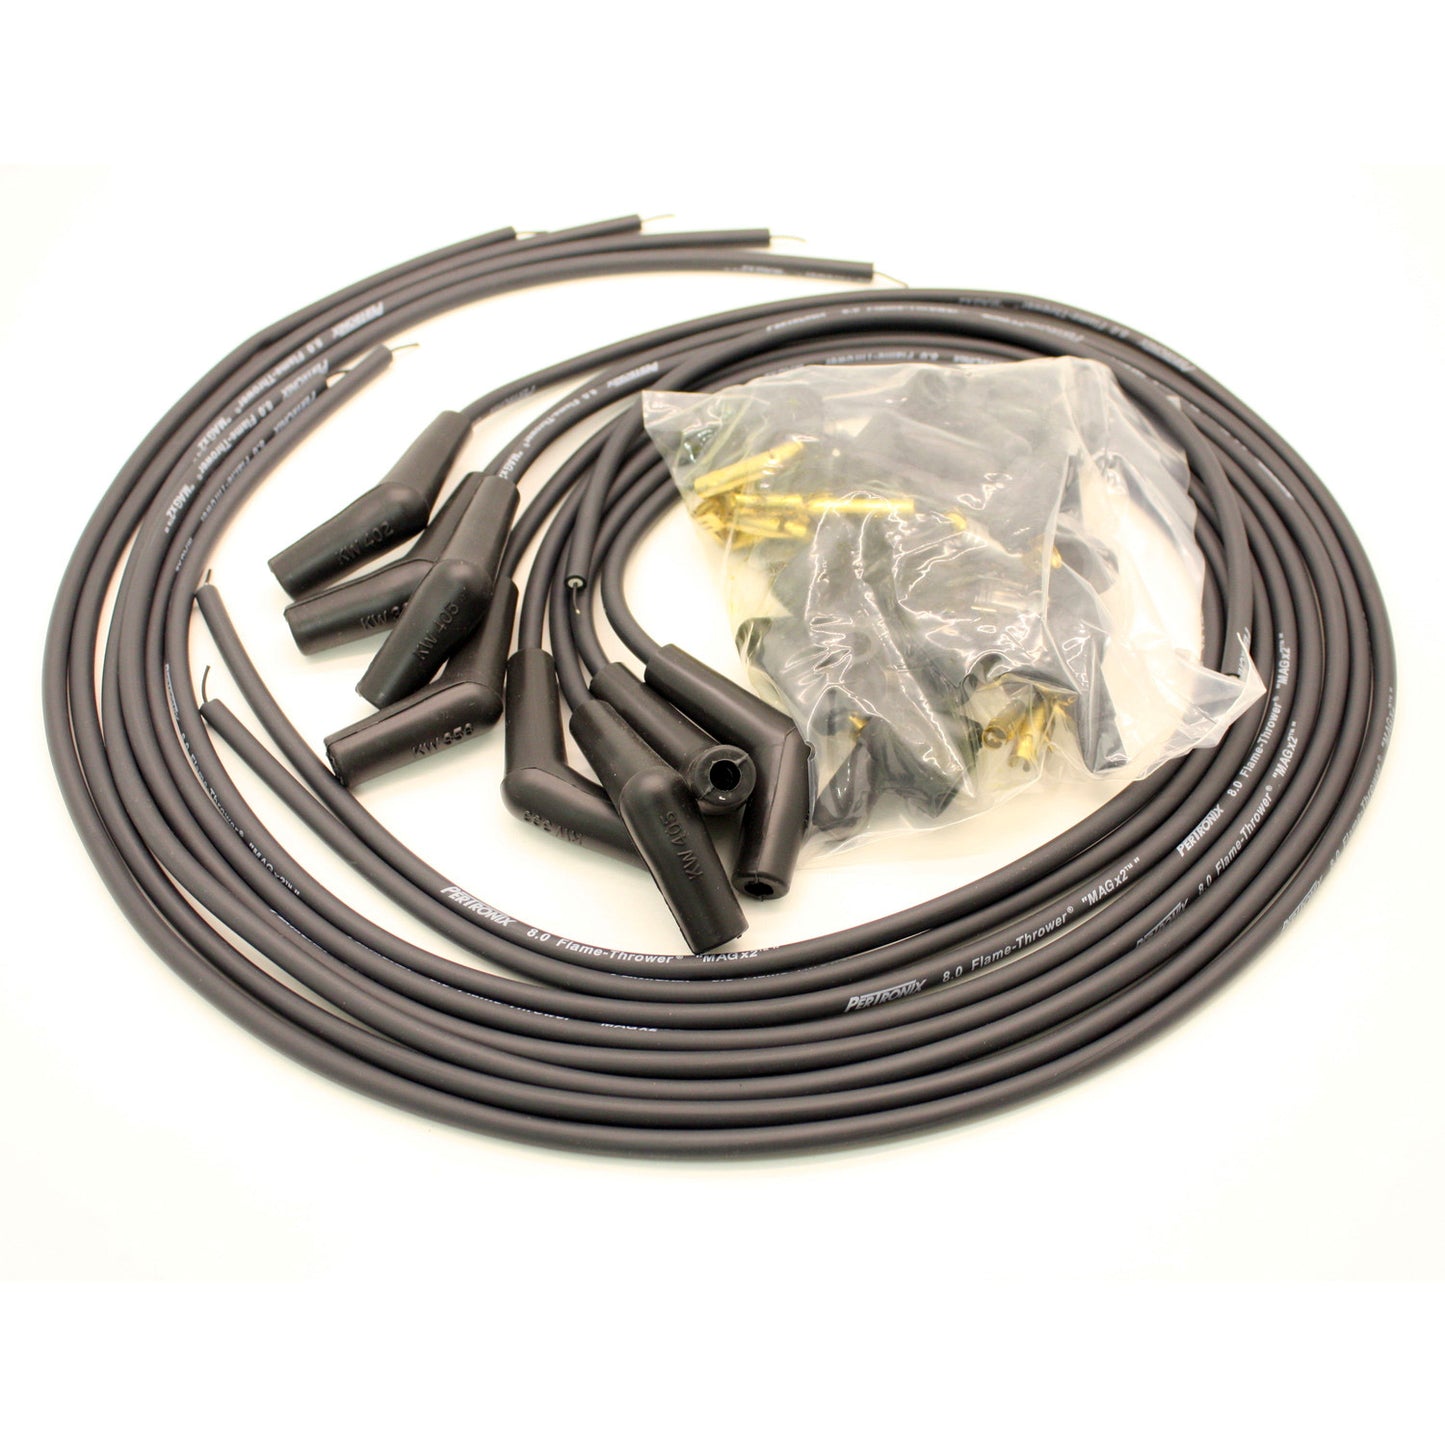 PerTronix 808215 Flame-Thrower Spark Plug Wires 8 cyl 8mm Universal 115 Degree Black